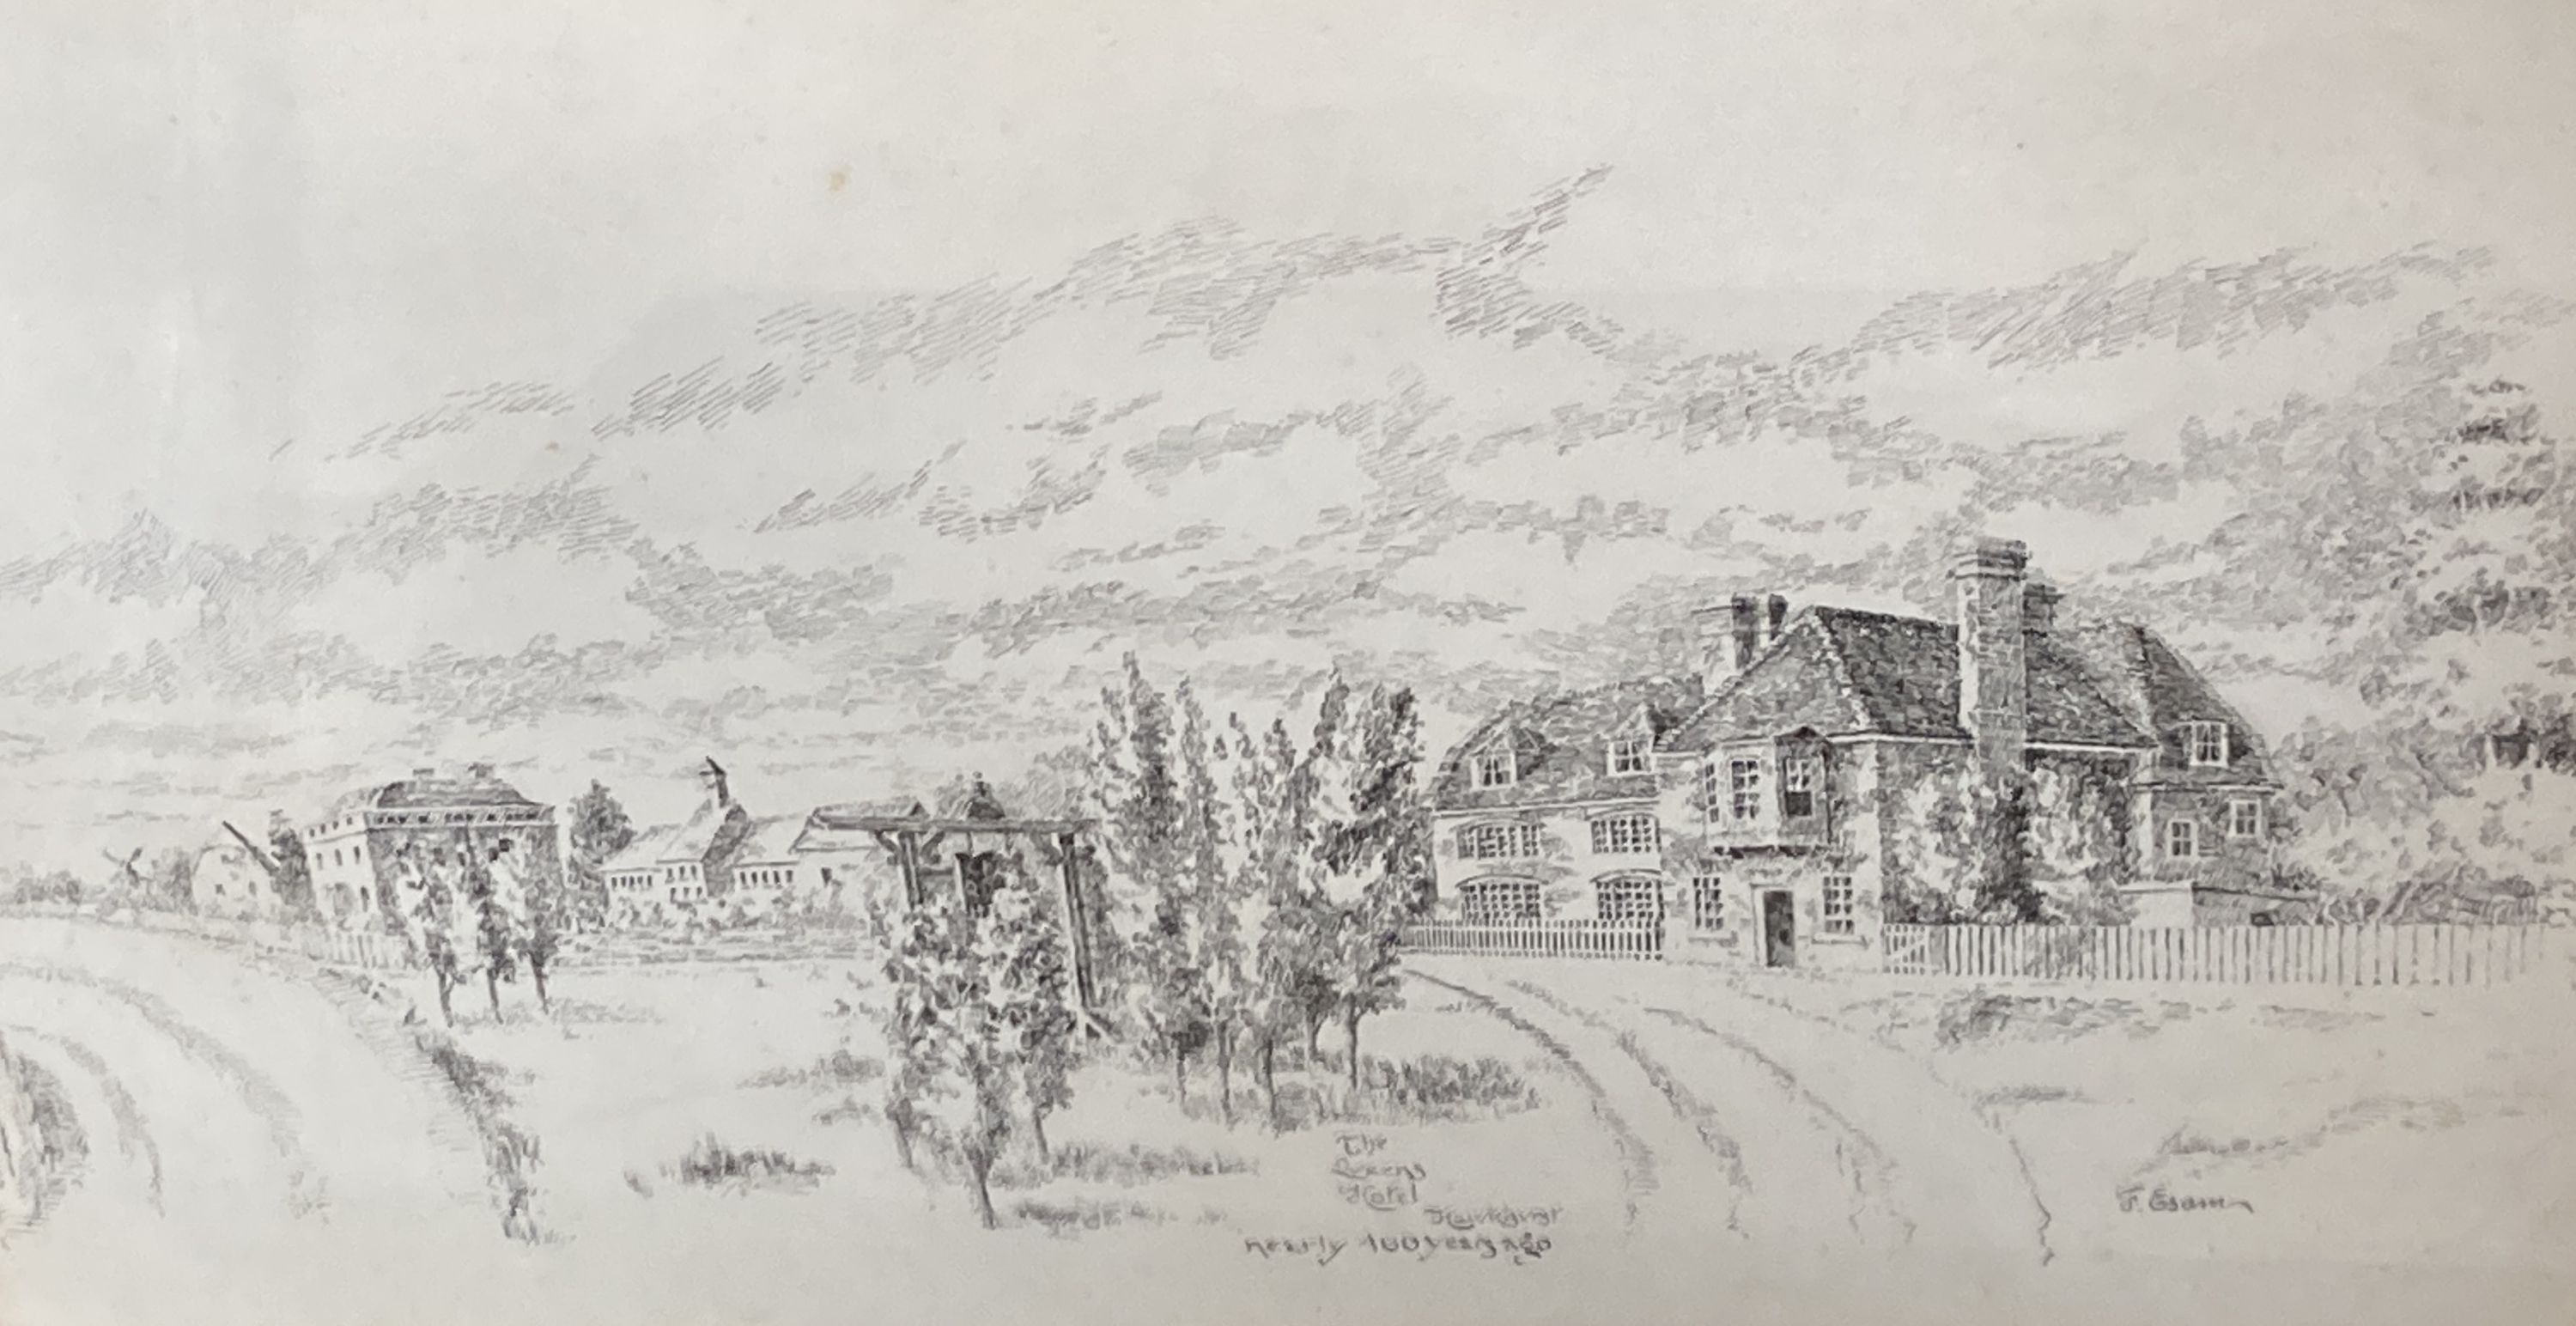 F. Esam c.1900, 5 pen and ink drawings: Highgate, Hawkhurst; Attwater; The Queen's Hotel, Hawkhurst; - Image 4 of 5